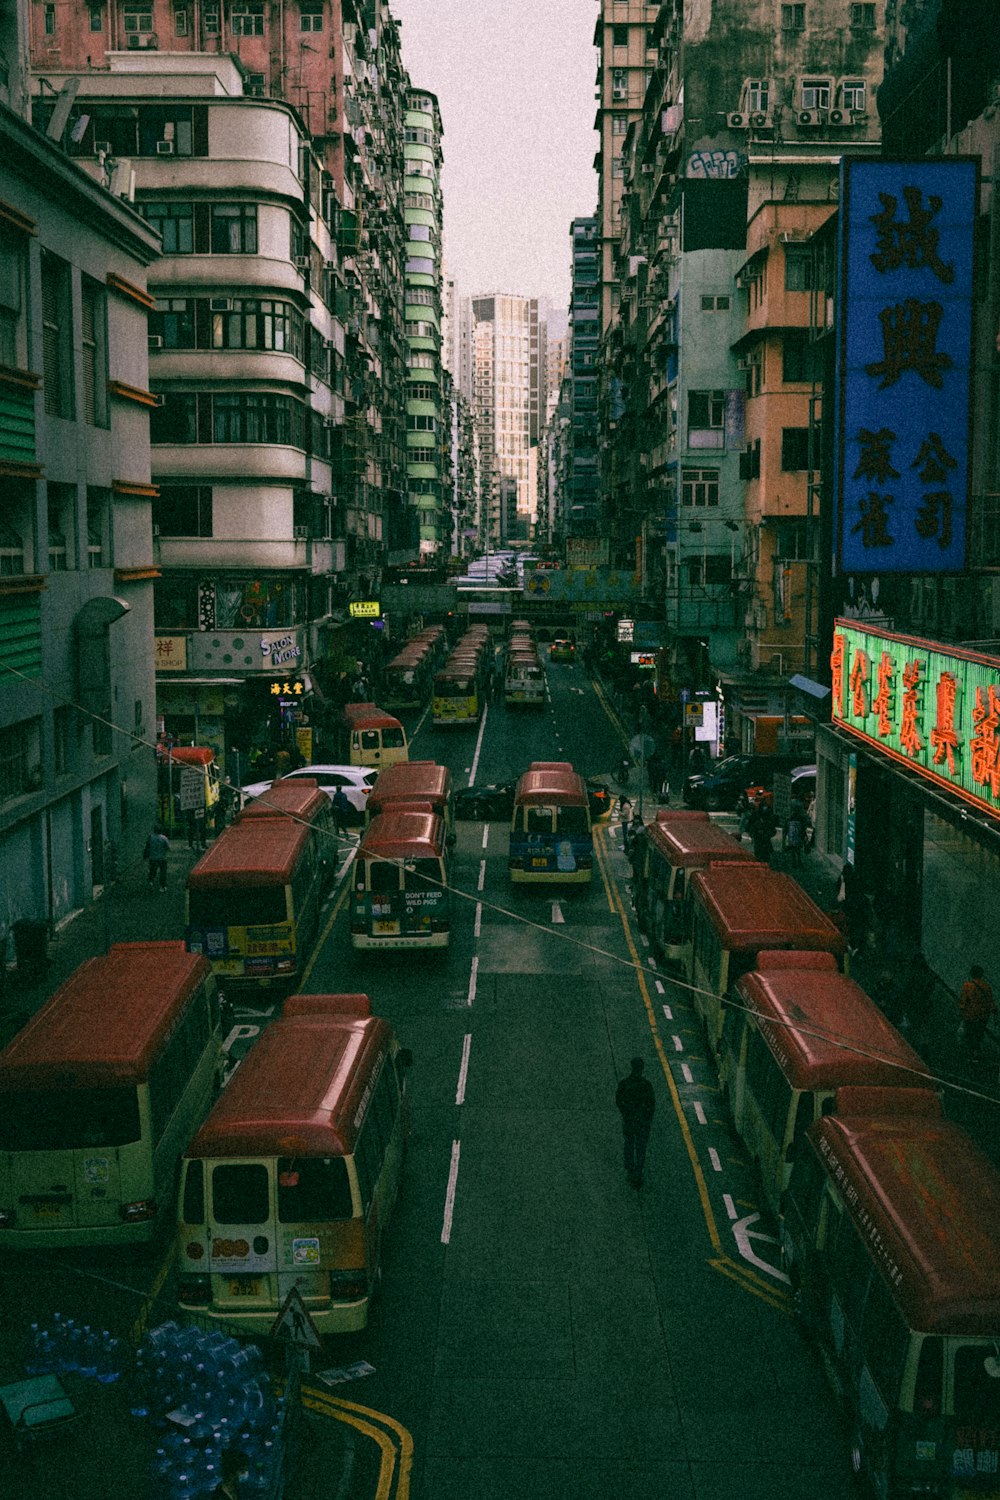 a city street filled with lots of buses